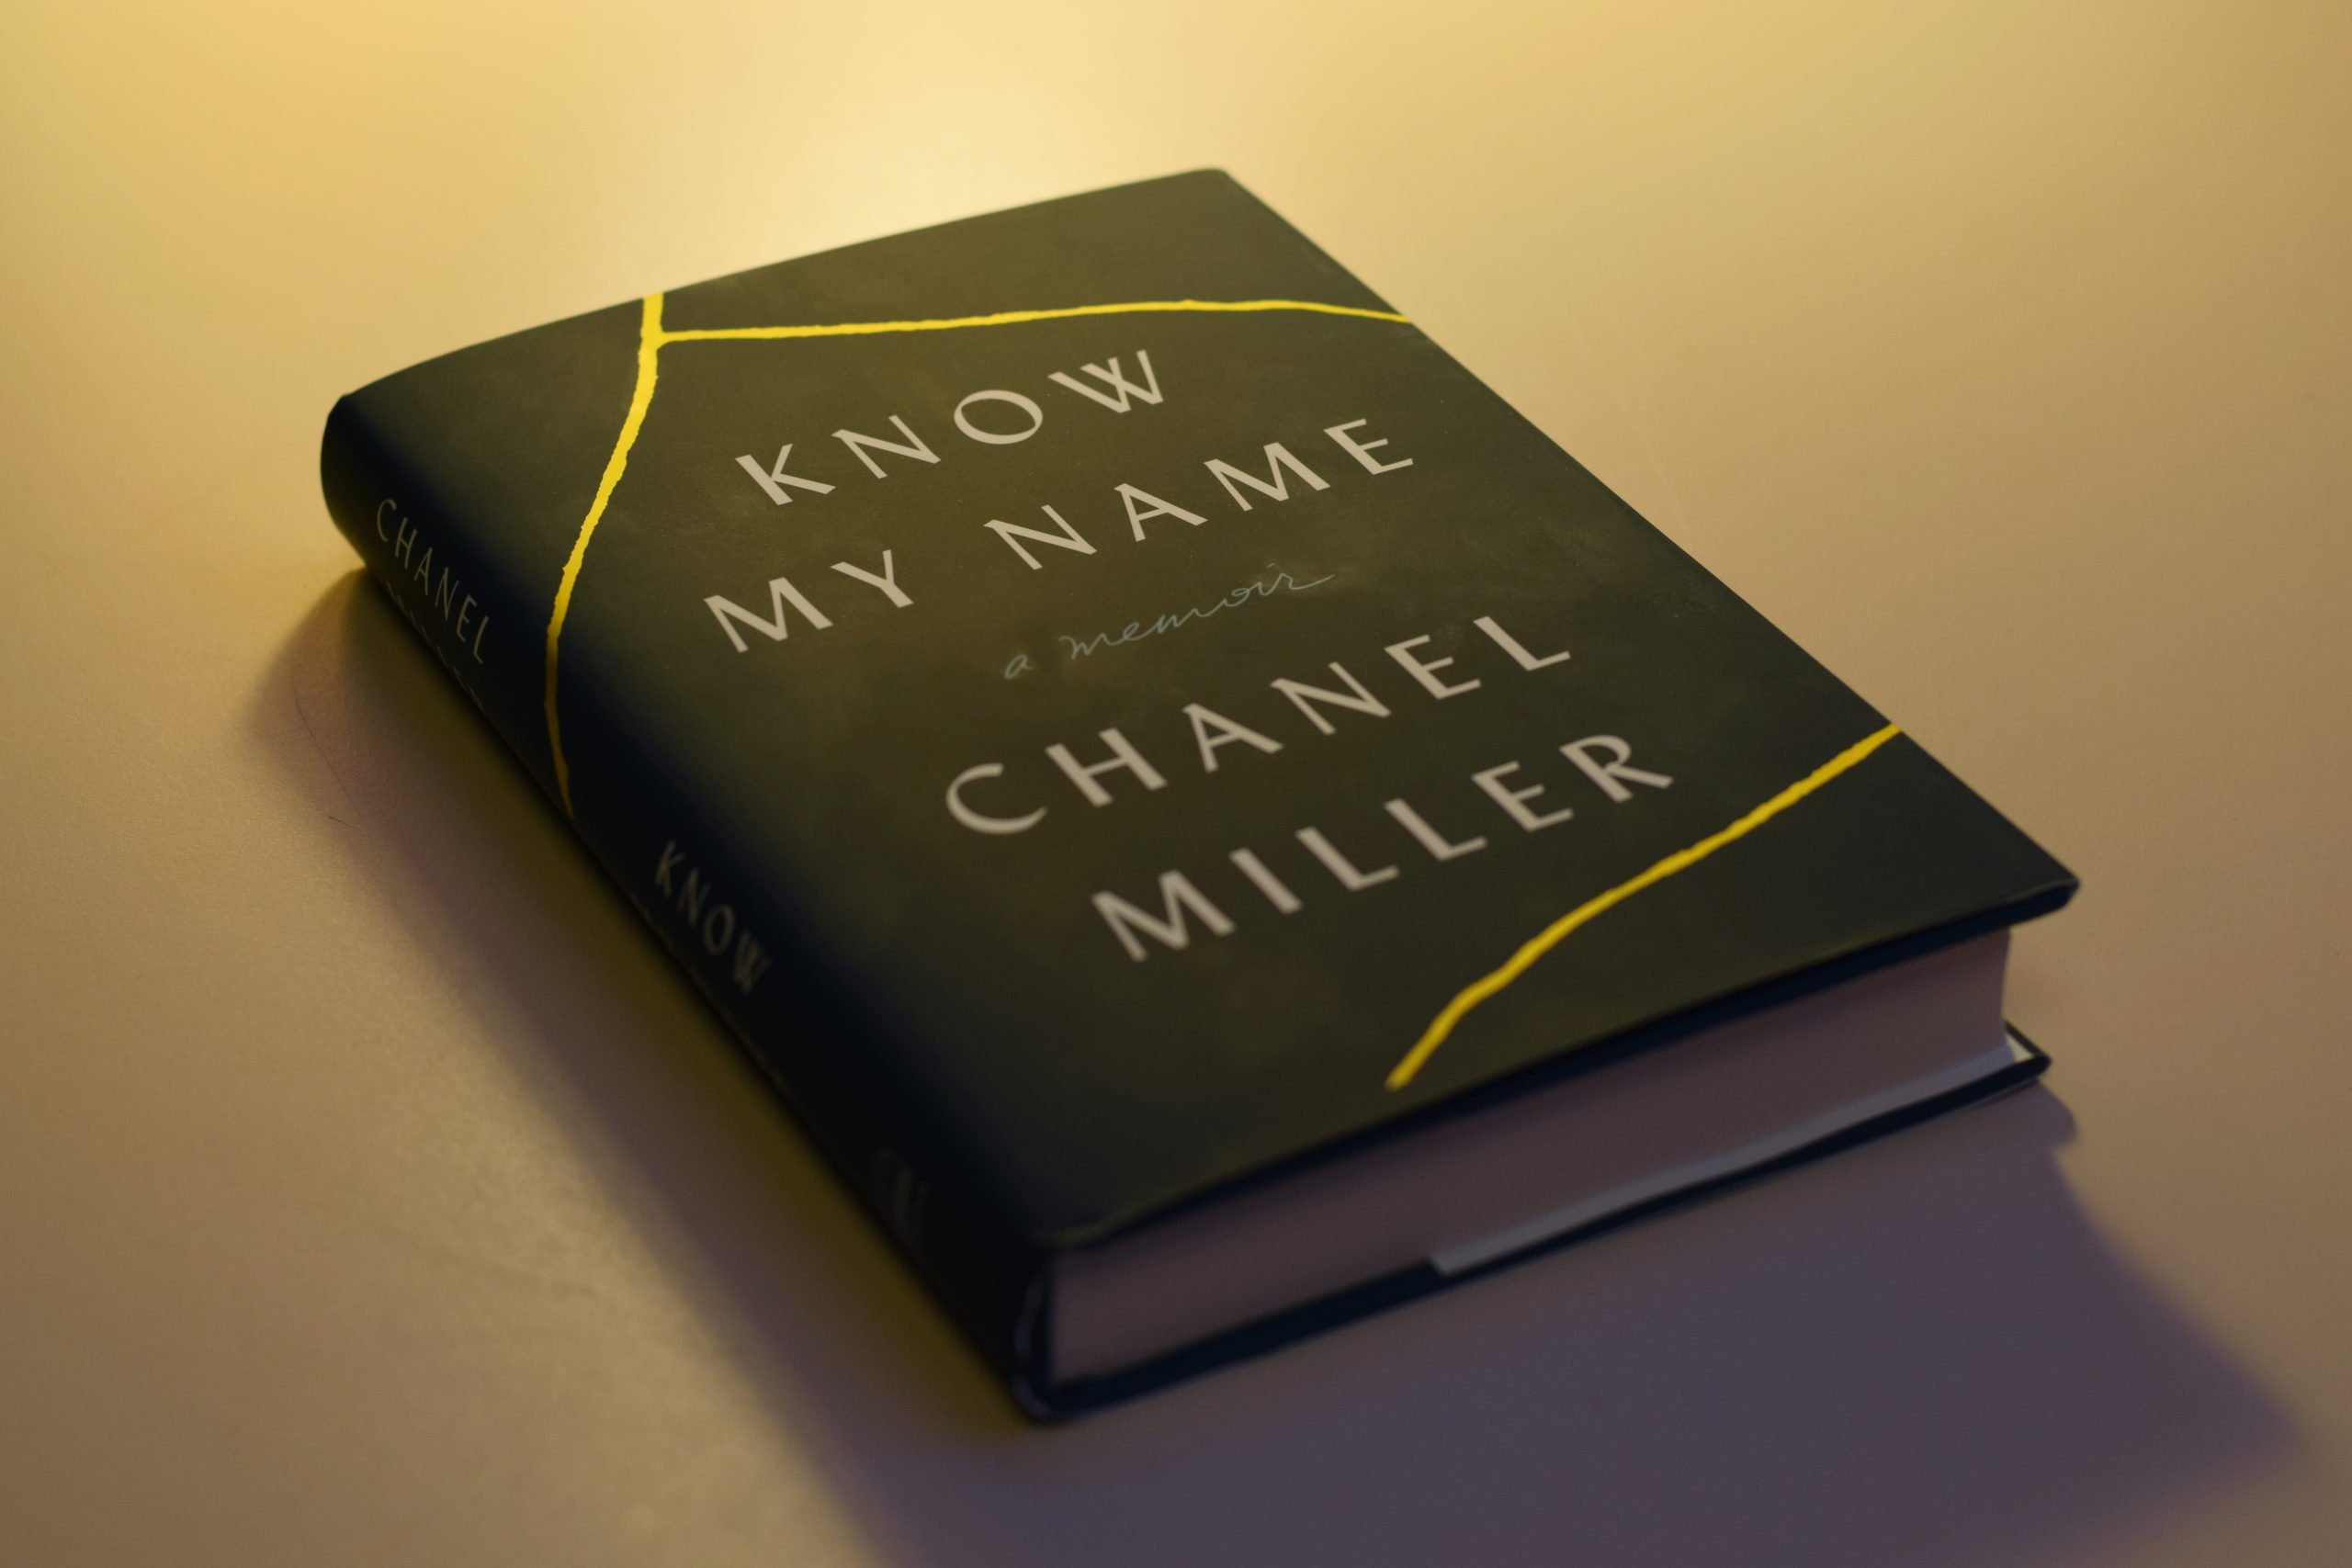 Know My Name by Chanel Miller